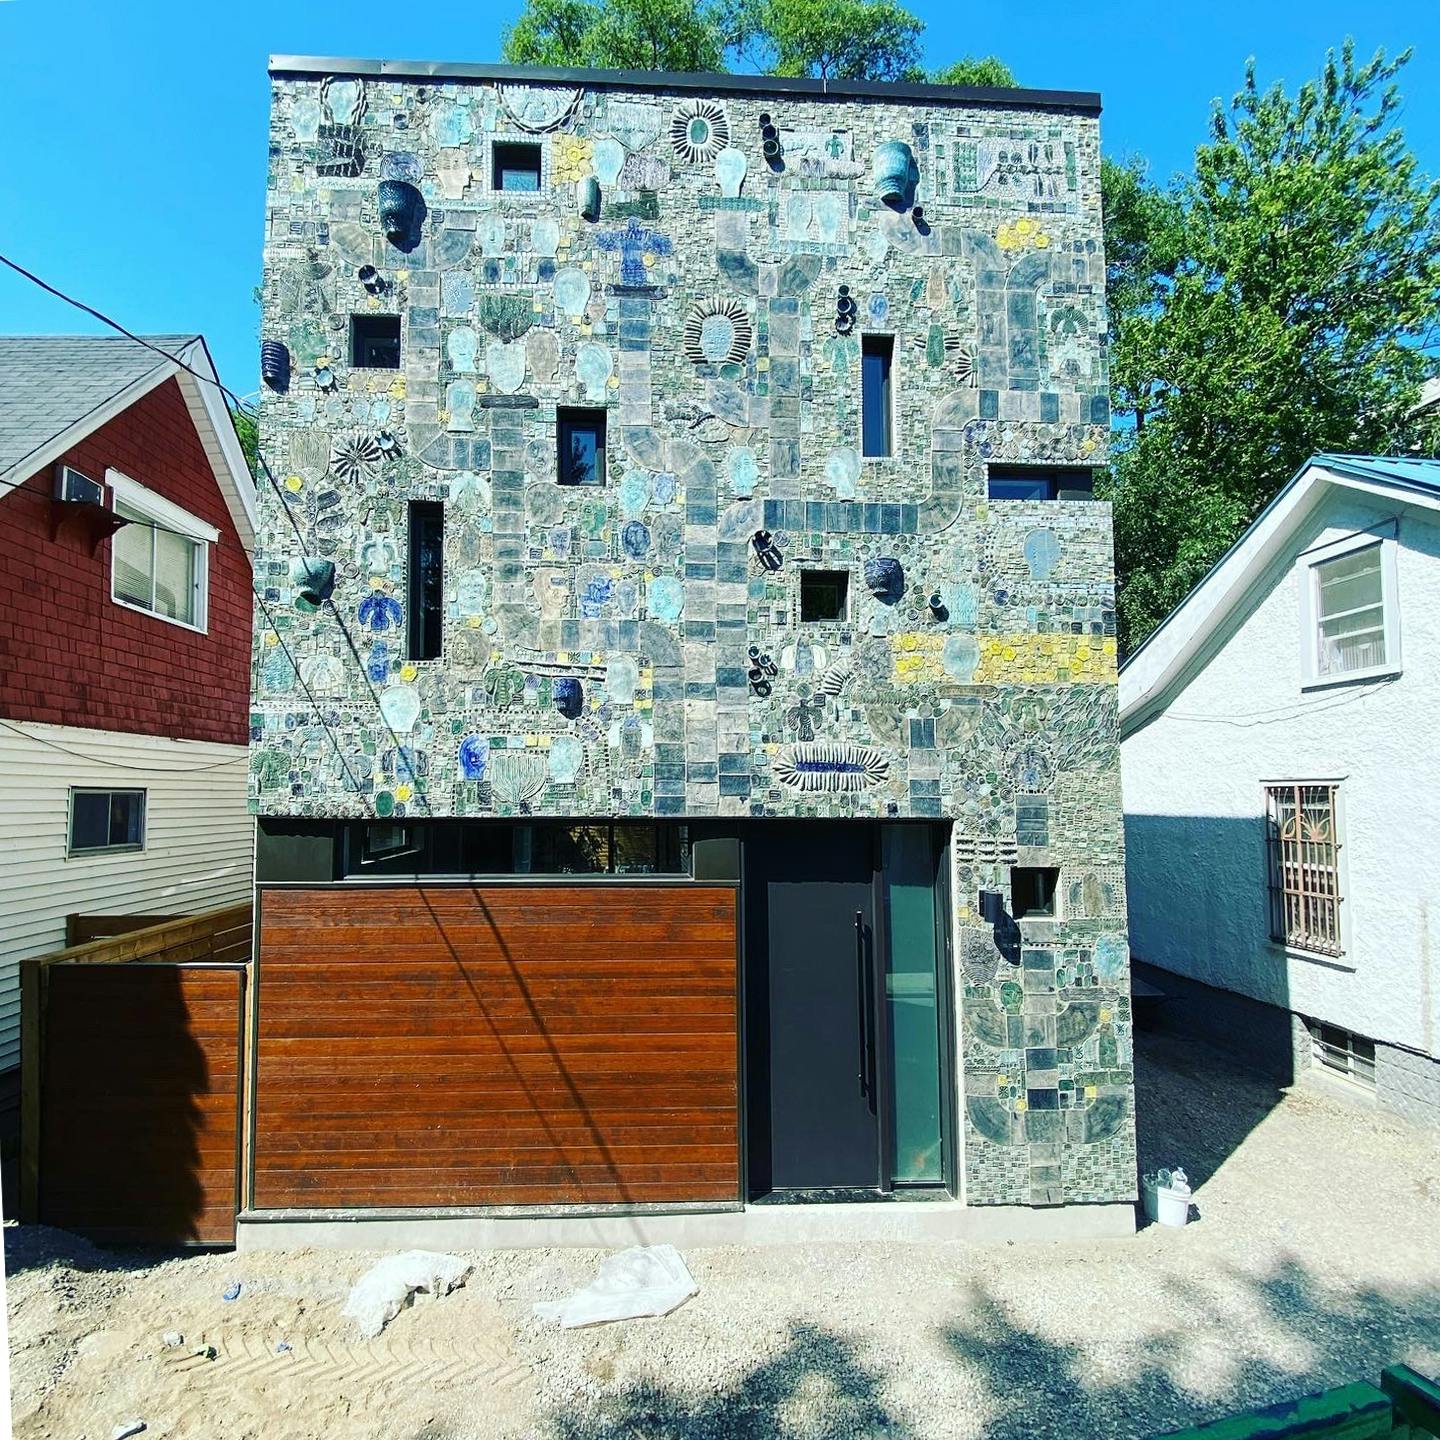 8 Henry Street - The Mosaic House